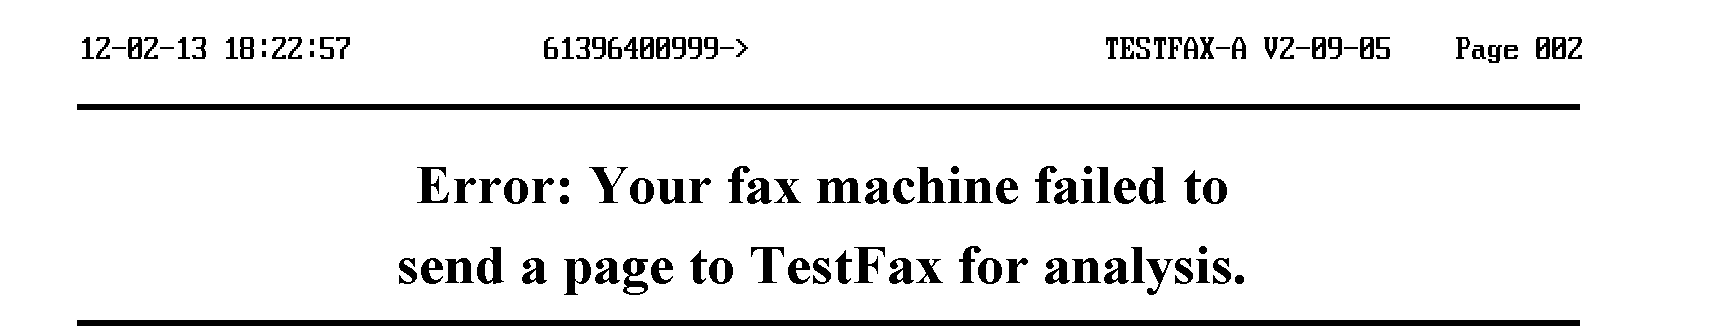 How can I test my fax machine?